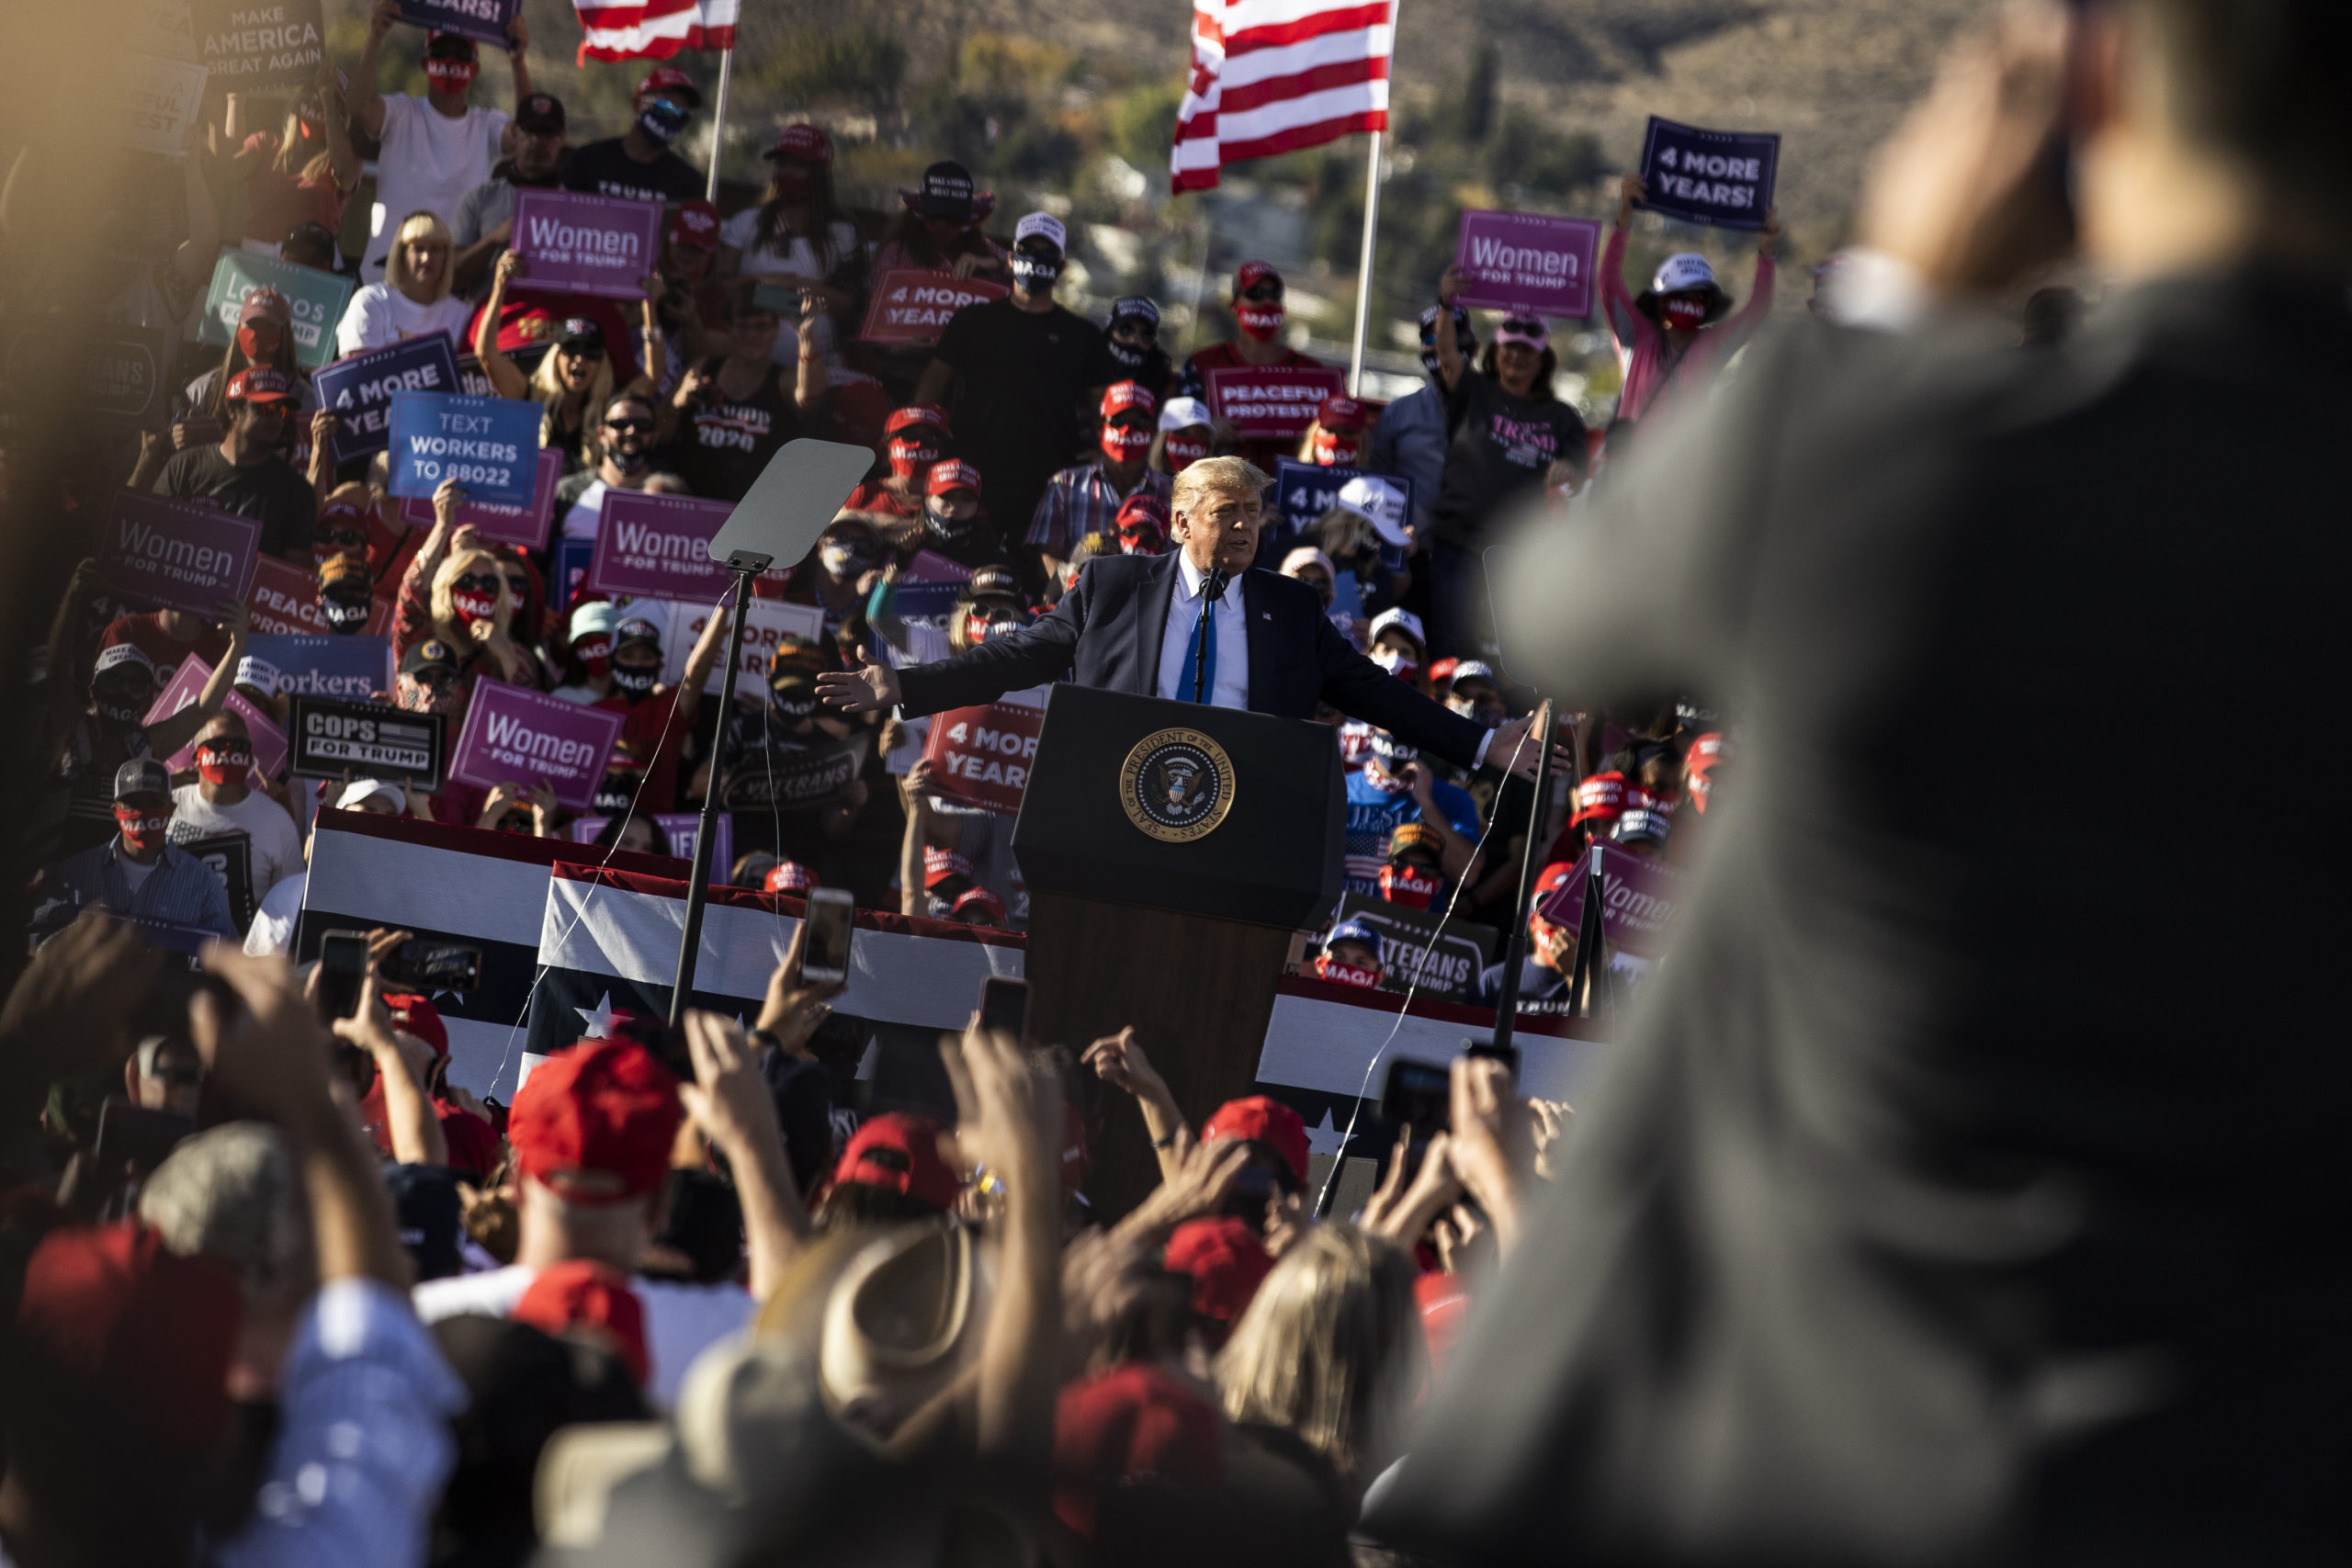 CARSON CITY, NV - OCTOBER 18: President Donald Trump speaks during a campaign rally on October 18, 2020 in Carson City, Nevada. With 16 days to go before the November election, President Trump is back on the campaign trail with multiple daily events as he continues to campaign against Democratic presidential nominee Joe Biden. (Photo by Stephen Lam/Getty Images)